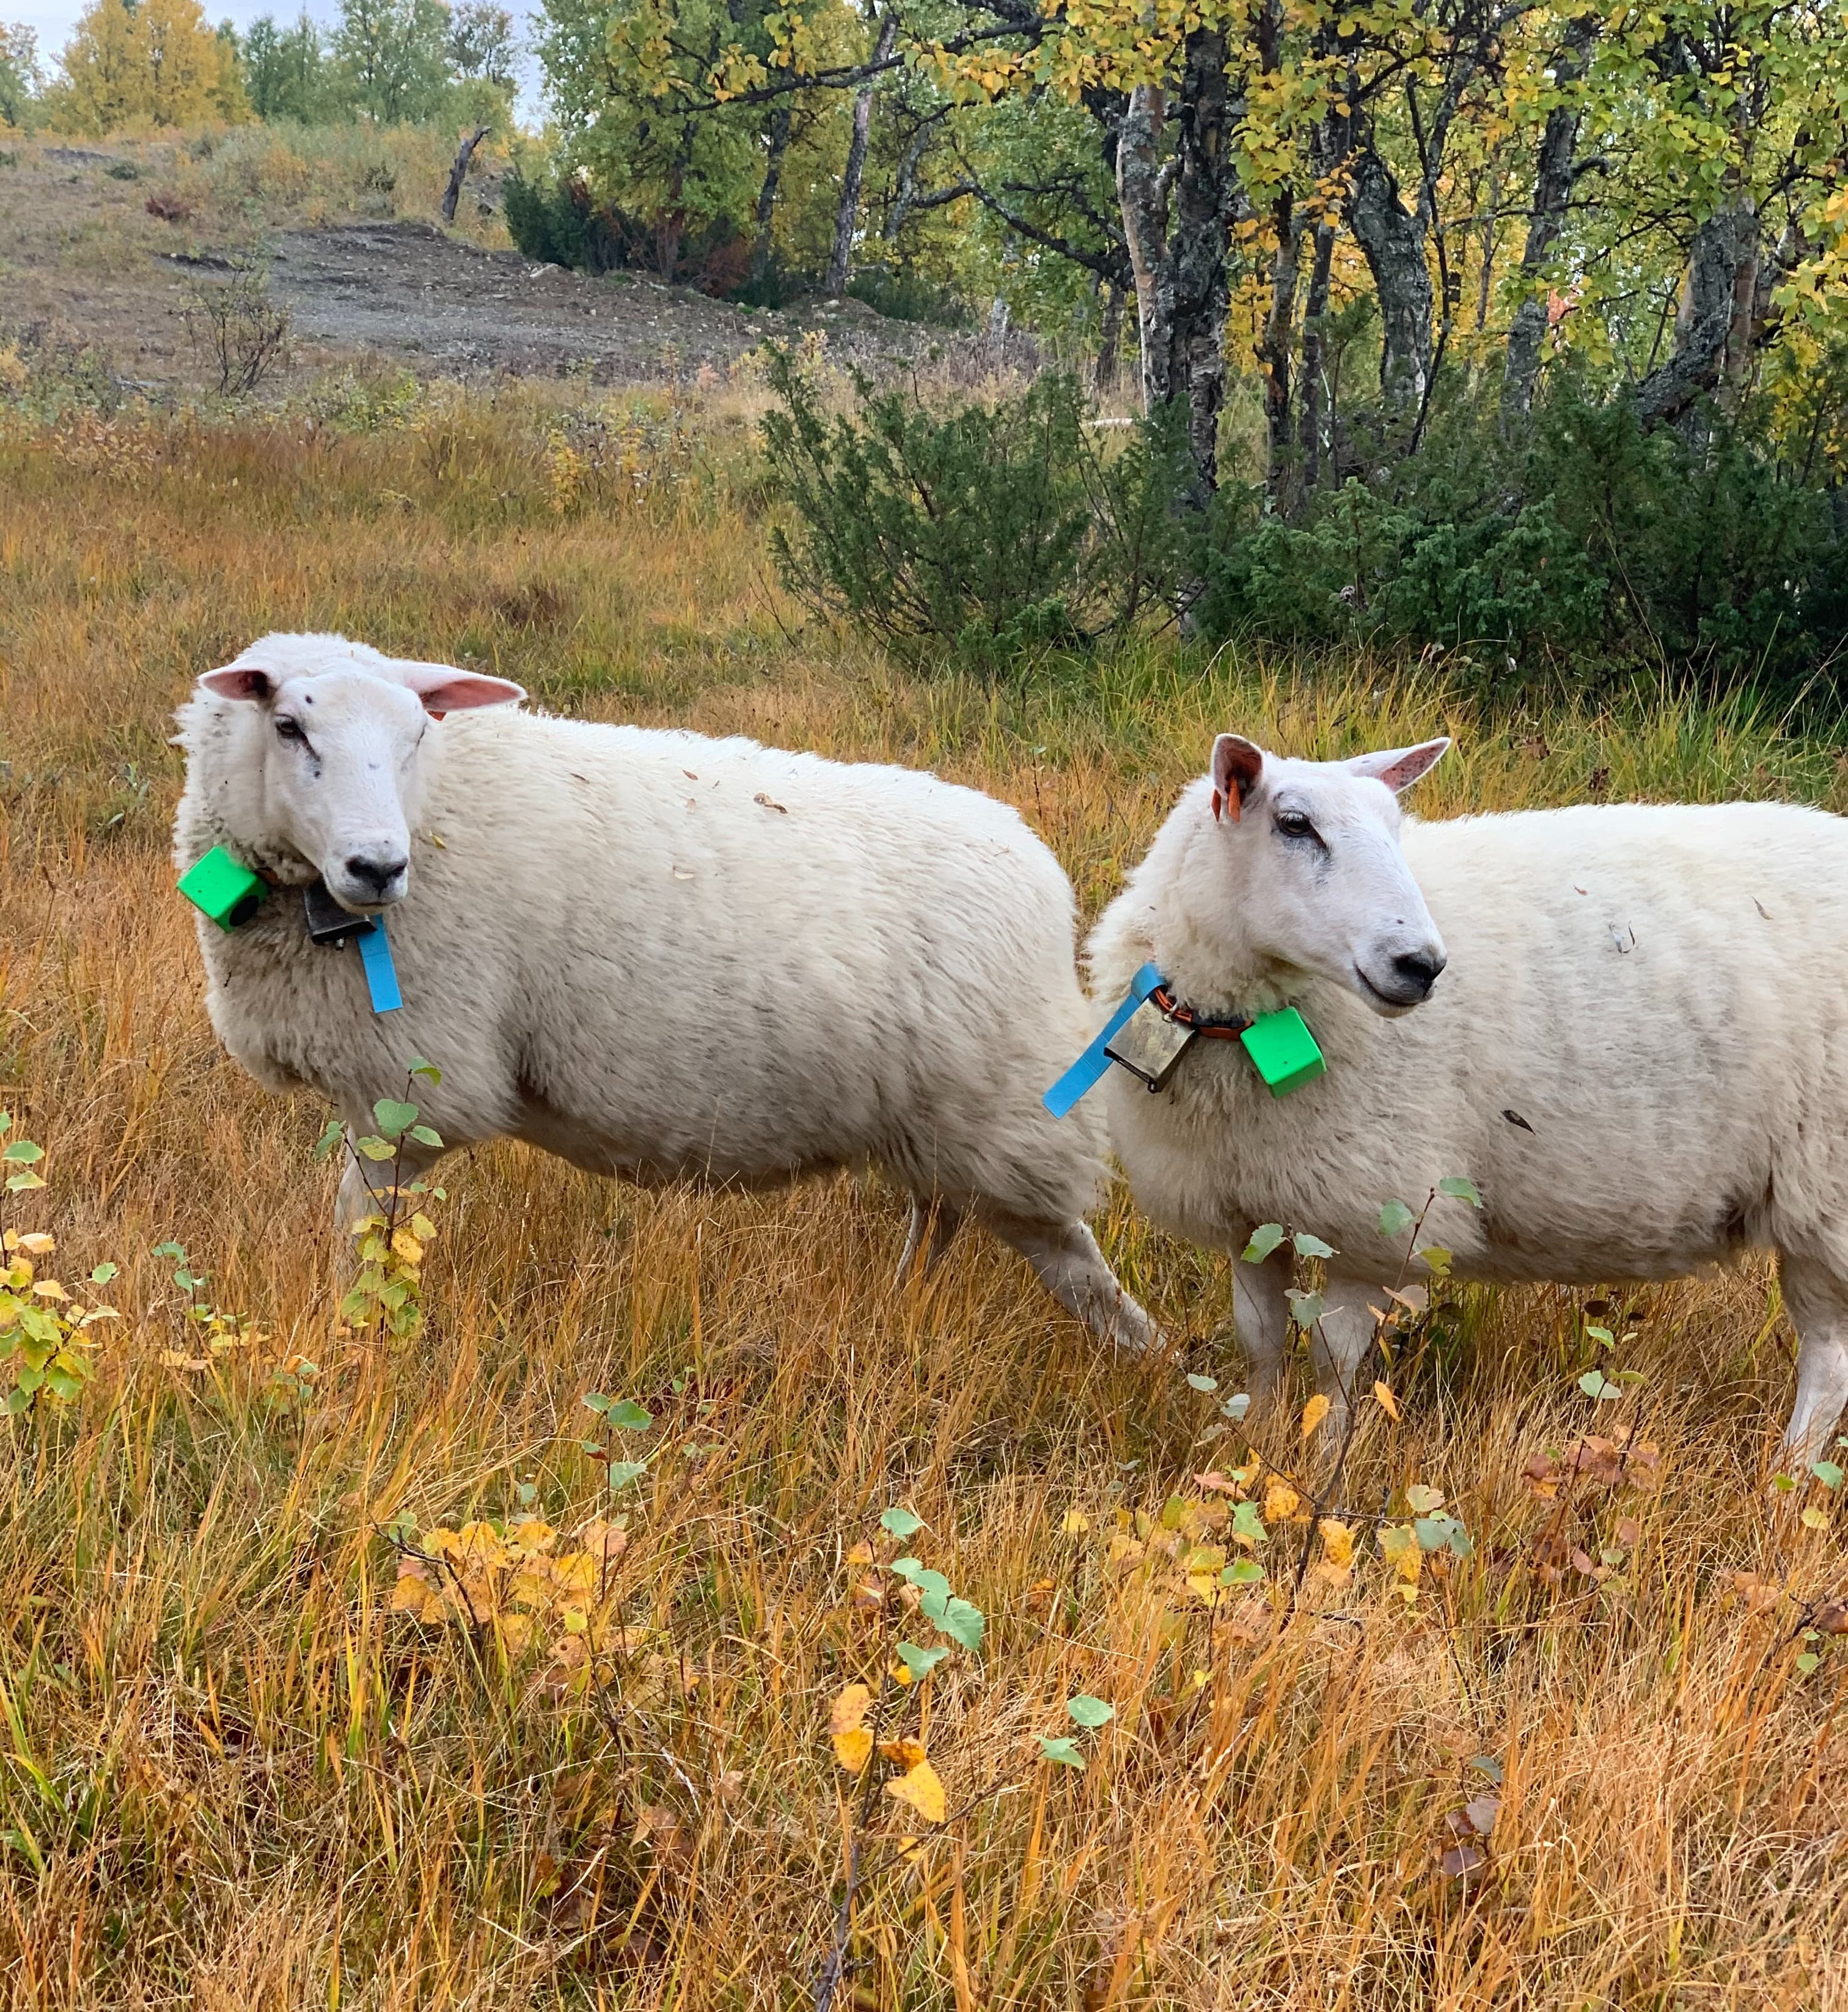 Sheep with E-bells